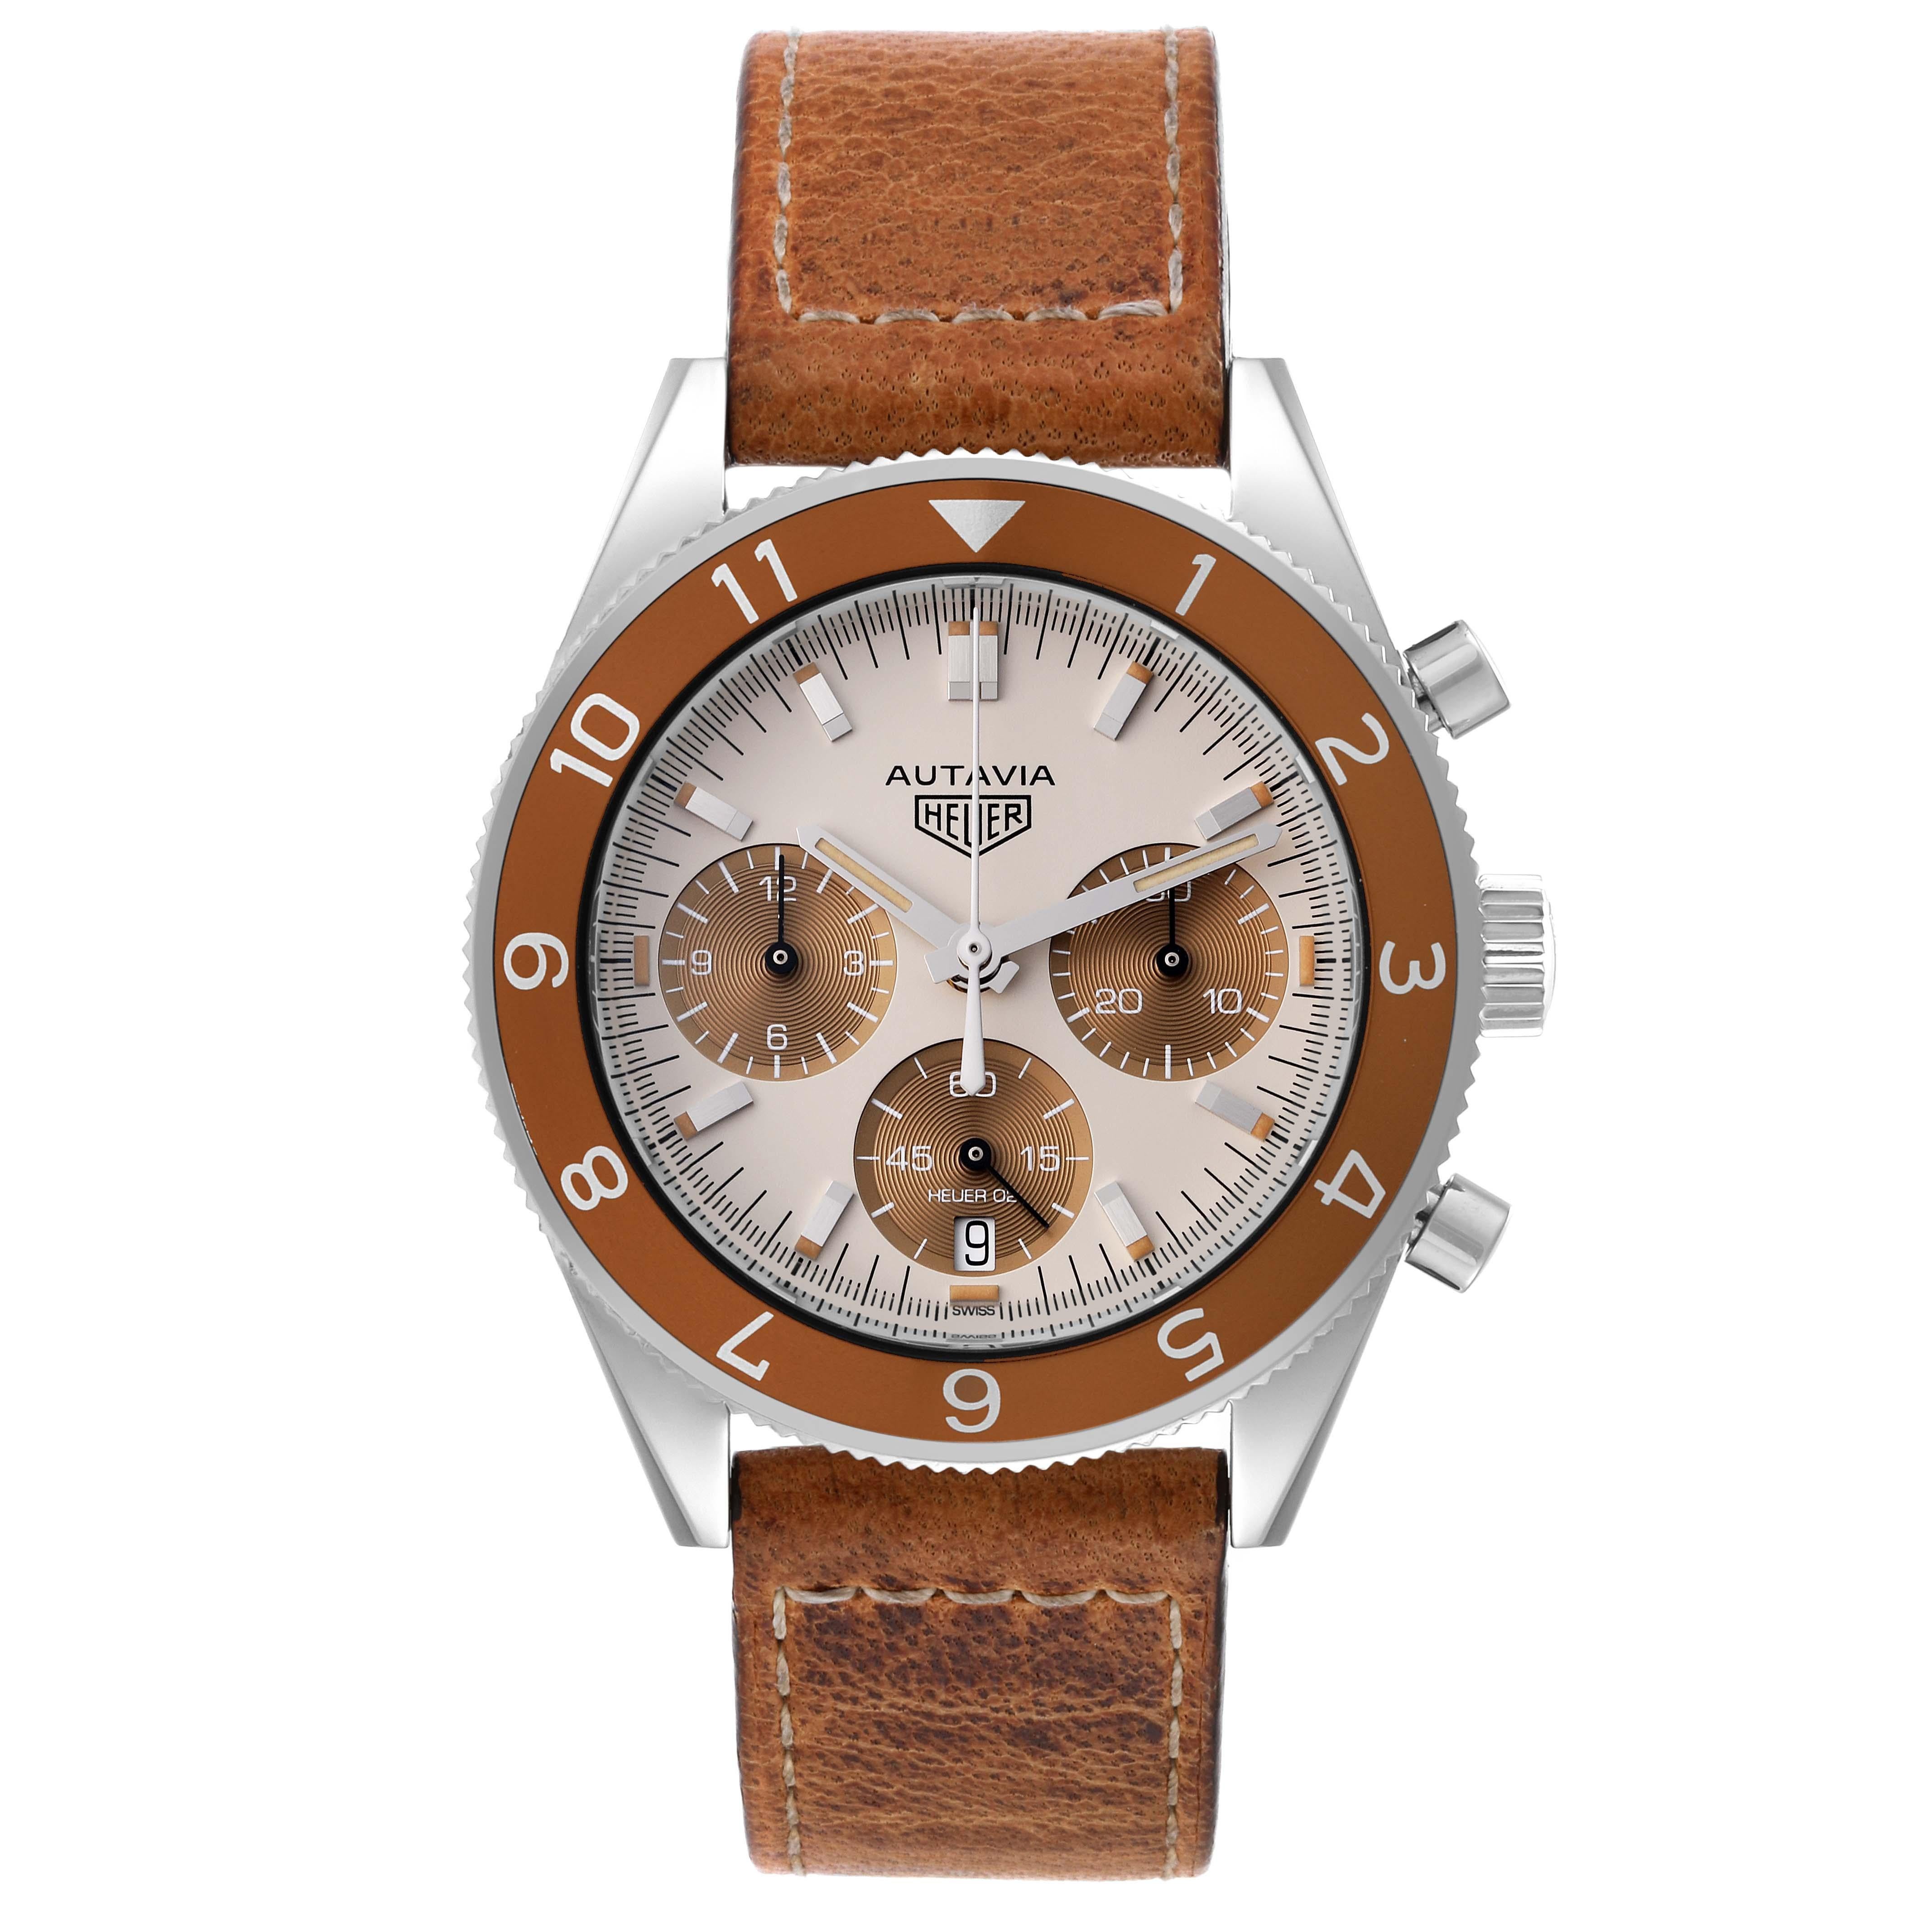 Tag Heuer Autavia Limited Edition UAE Chronograph Steel Mens Watch CBE2113. Automatic self-winding chronograph movement. Stainless steel case 42.0 mm in diameter. Transparent exhibition sapphire crystal caseback. Brown bi-directional rotating bezel